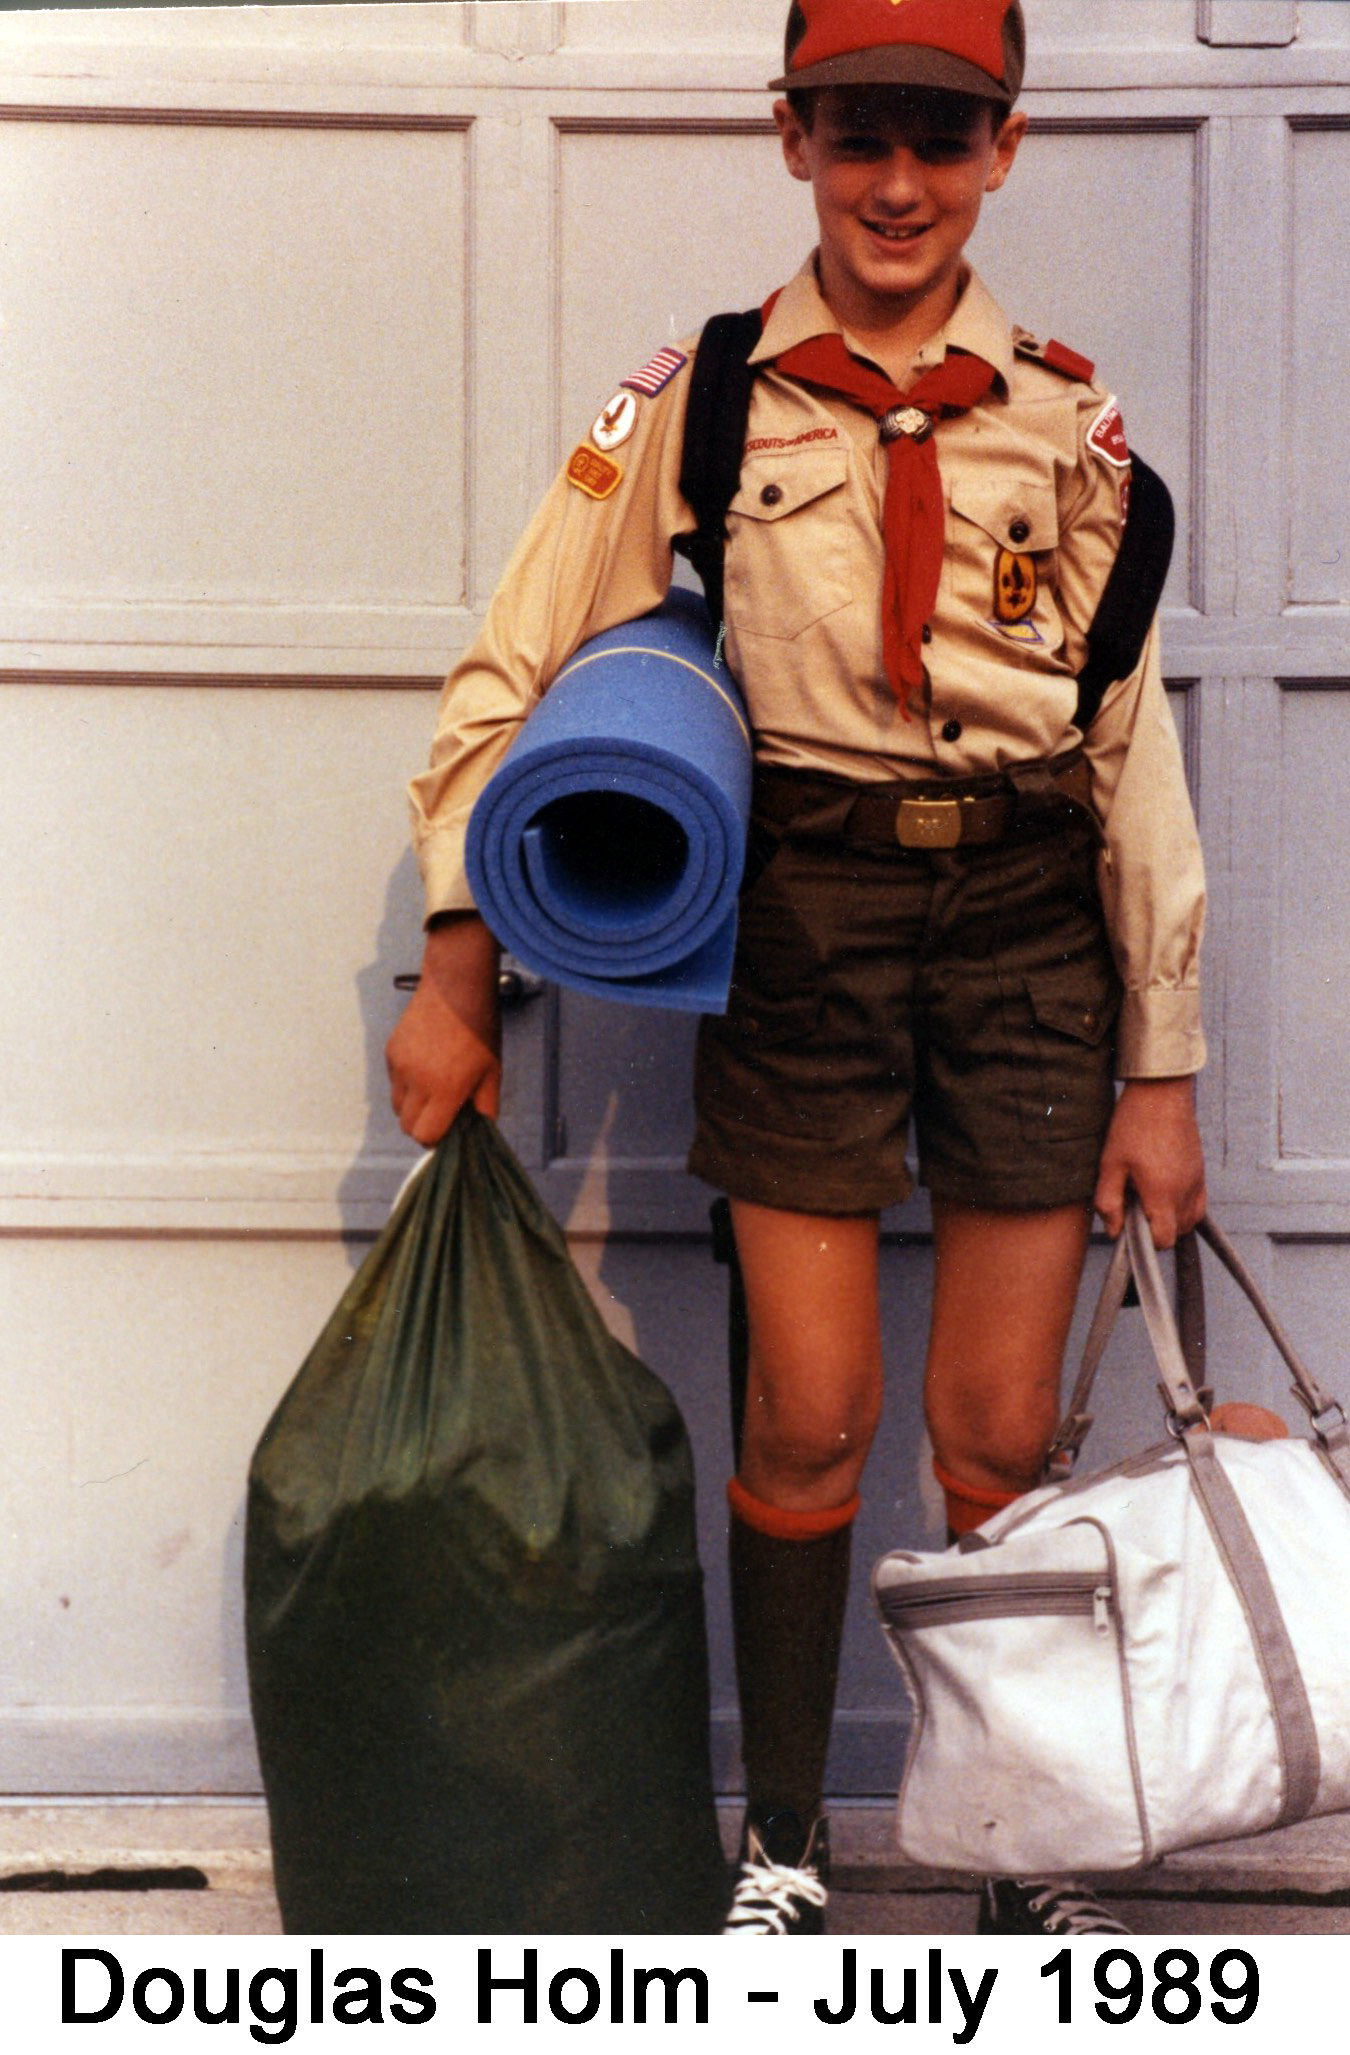 He is standing in front of our garage door in uniform with two bags and a rolled-up foam mattress